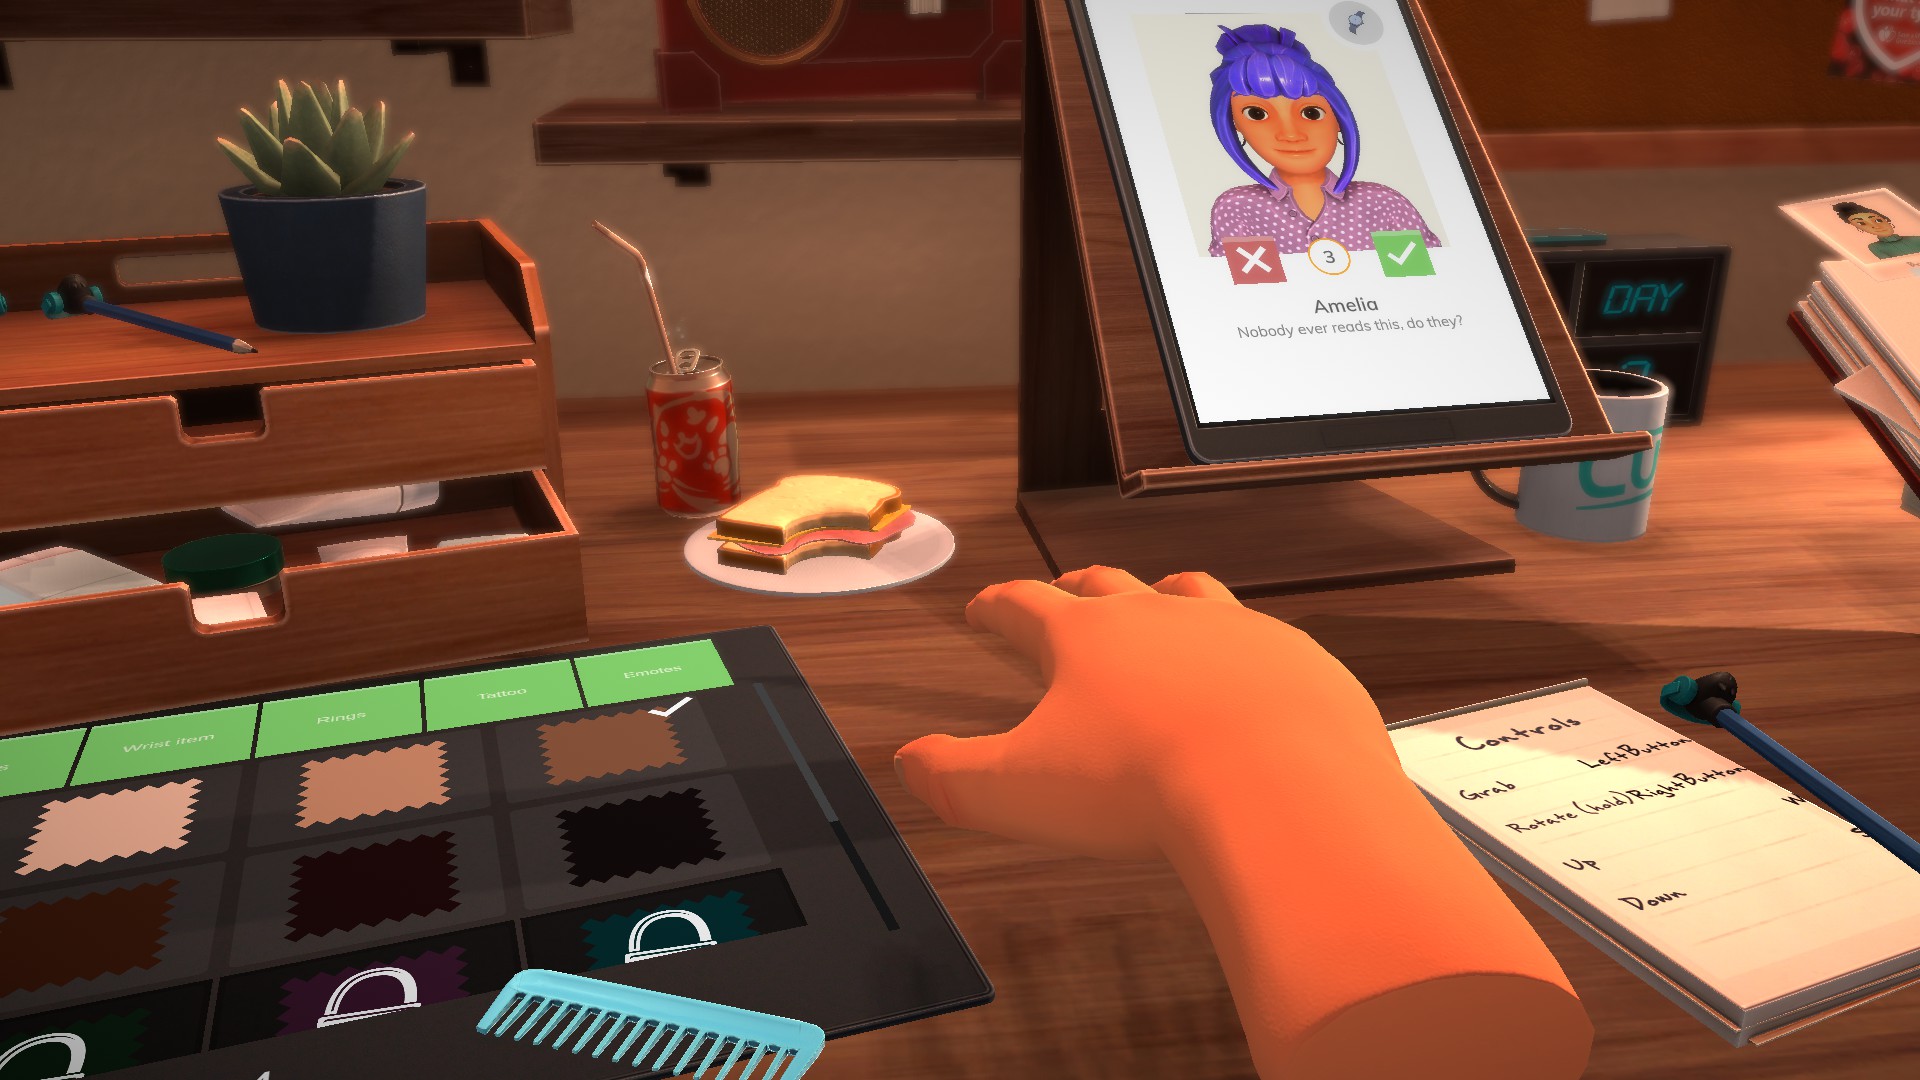 Table Manners: Physics-Based Dating Game Free Download